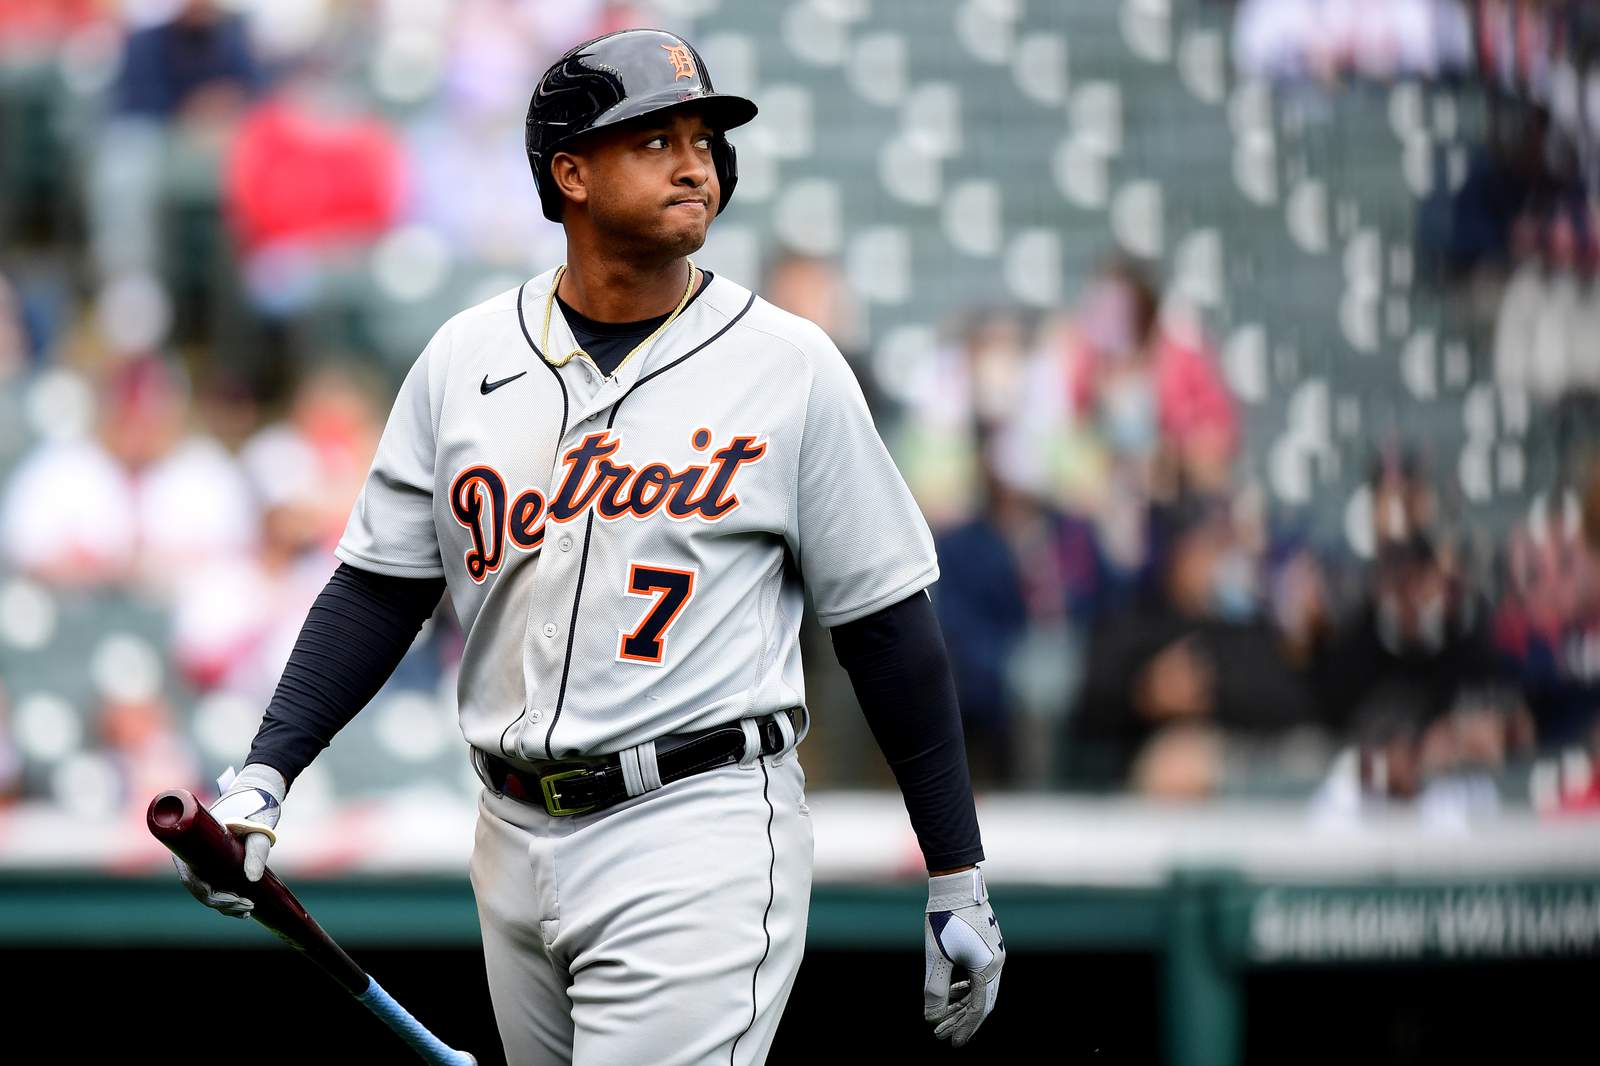 Hopefully you didn’t spend your entire weekend watching the Detroit Tigers